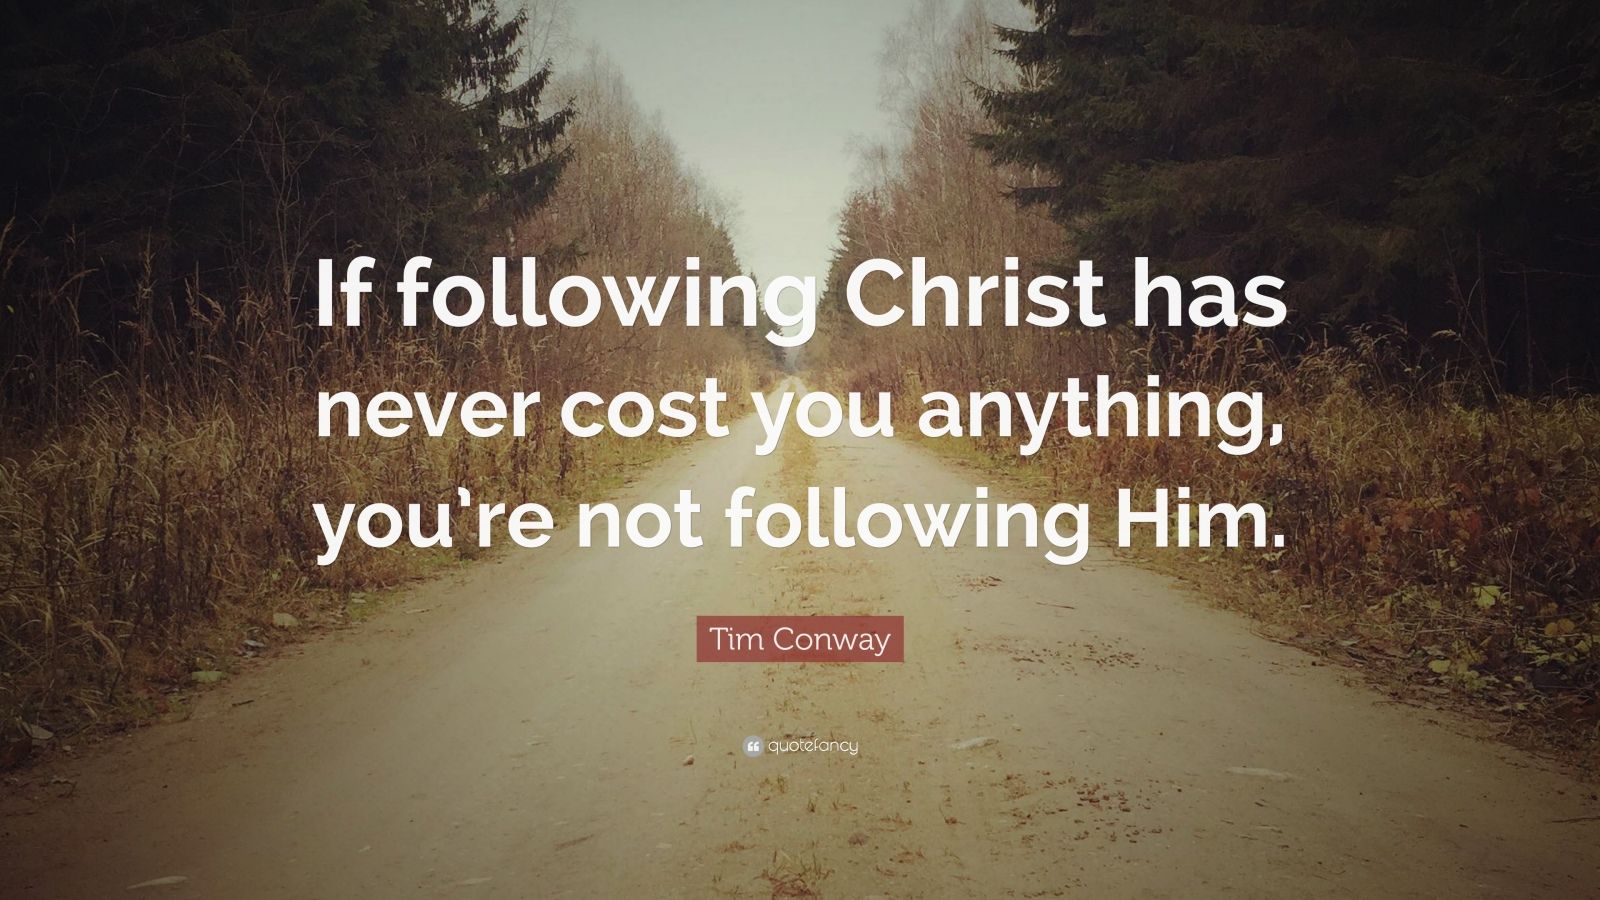 Tim Conway Quote: “If following Christ has never cost you anything, you